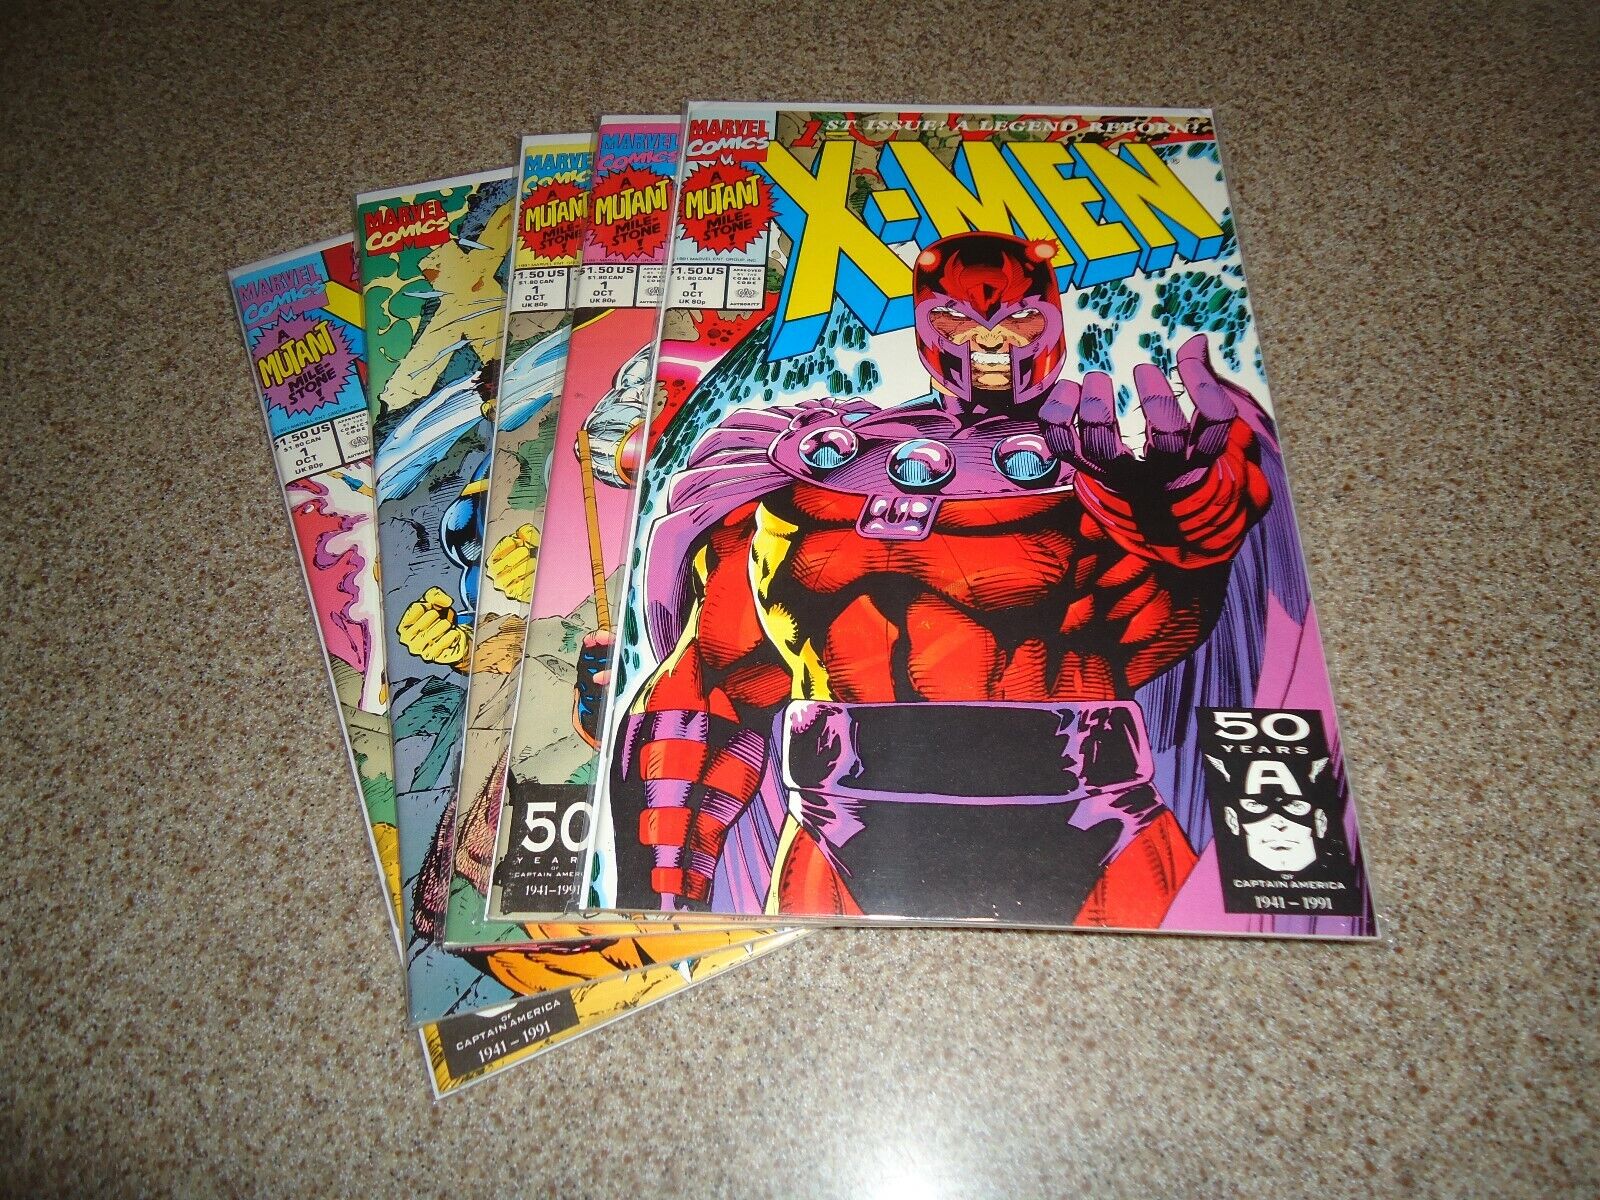 XMEN #1 LOT OF ALL FIVE VARIANT COVERS